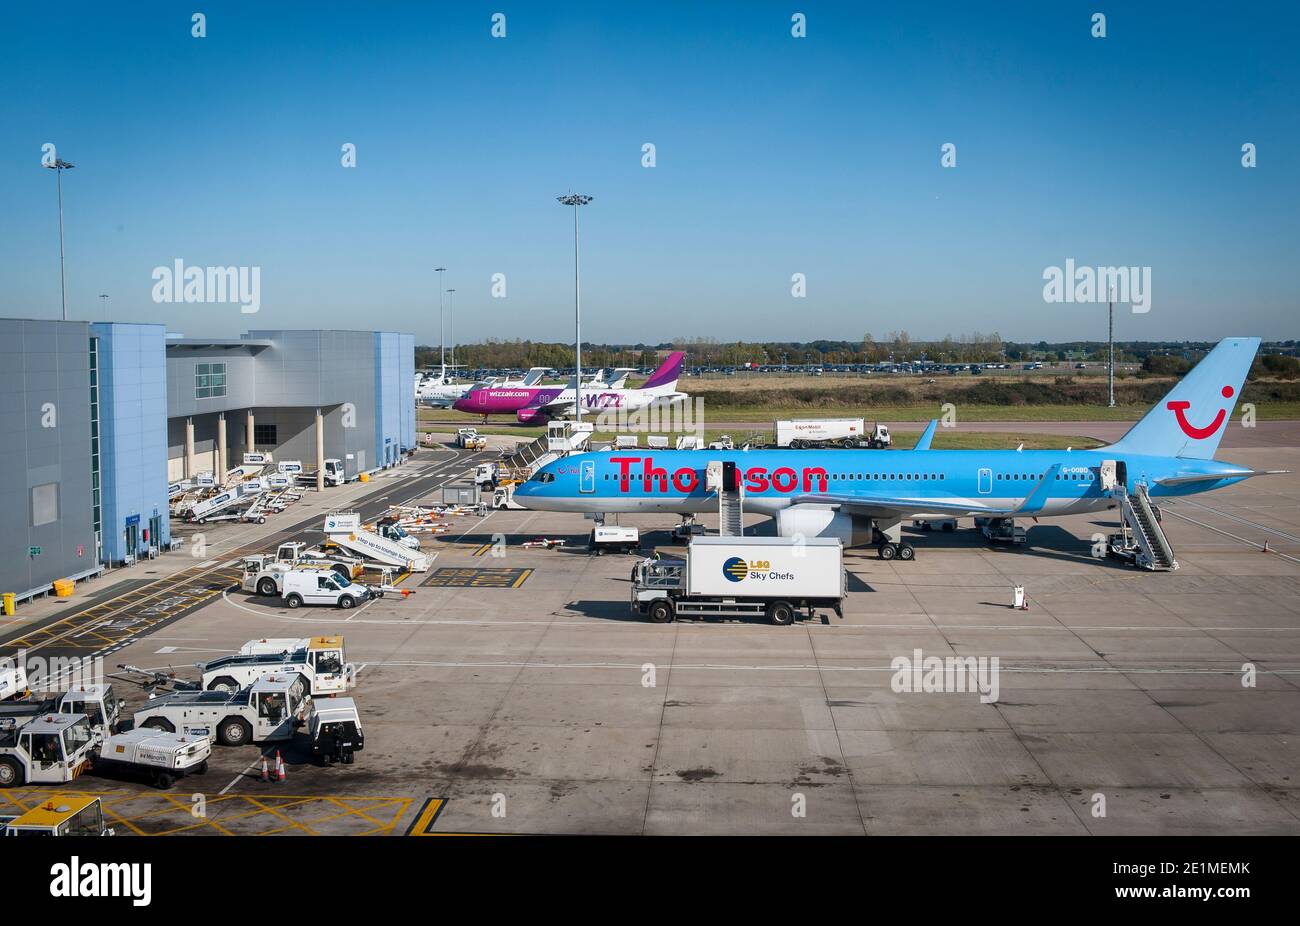 Thomson Airways Boeing 757-200 waiting on the apron at Luton Airport, Bedfordshire, England. Stock Photo